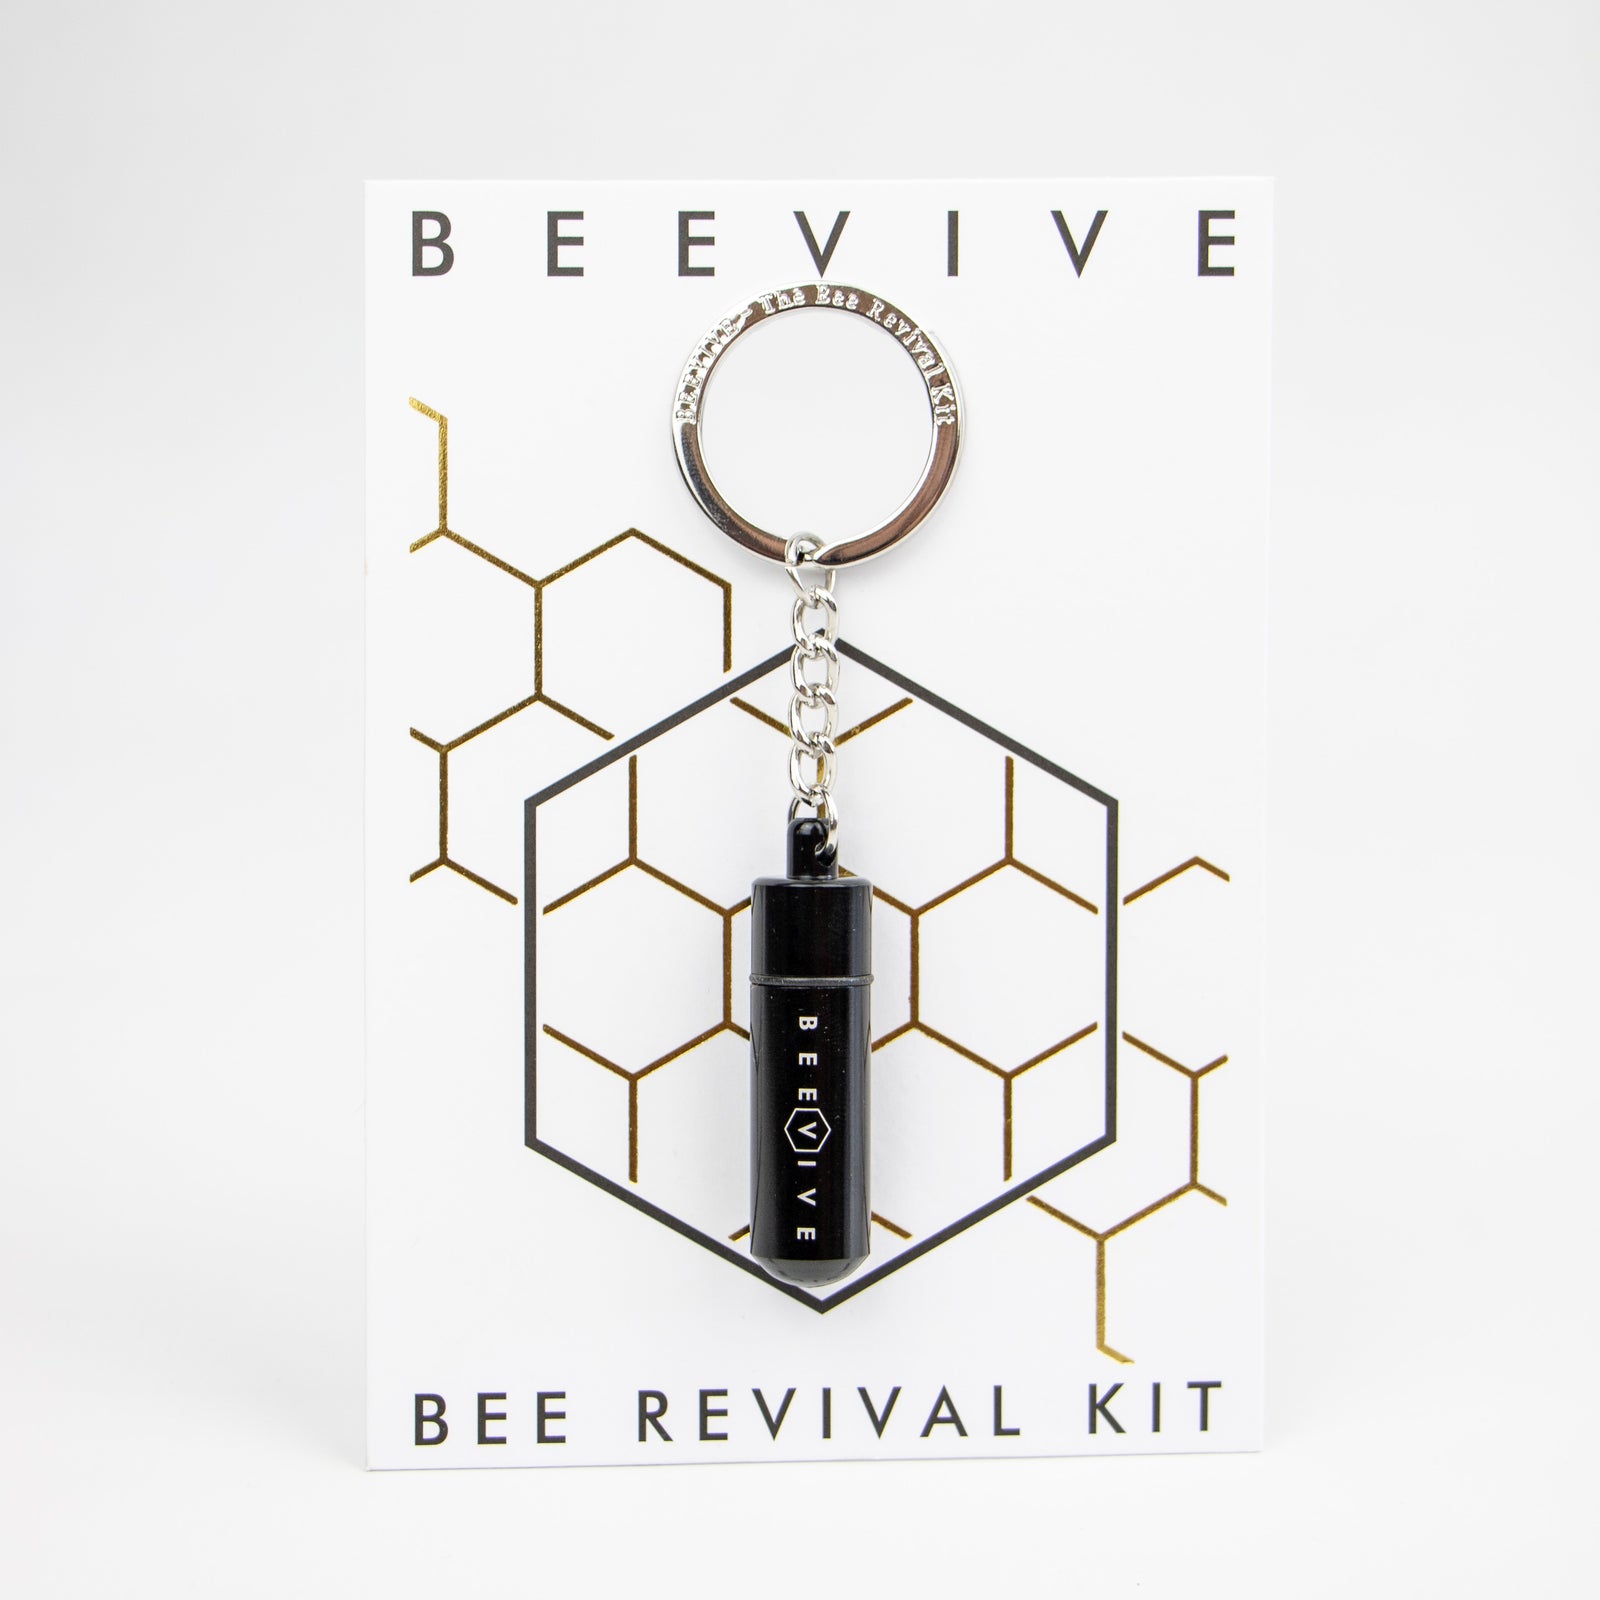 The Bee Revival Kit - BLACK EDITION